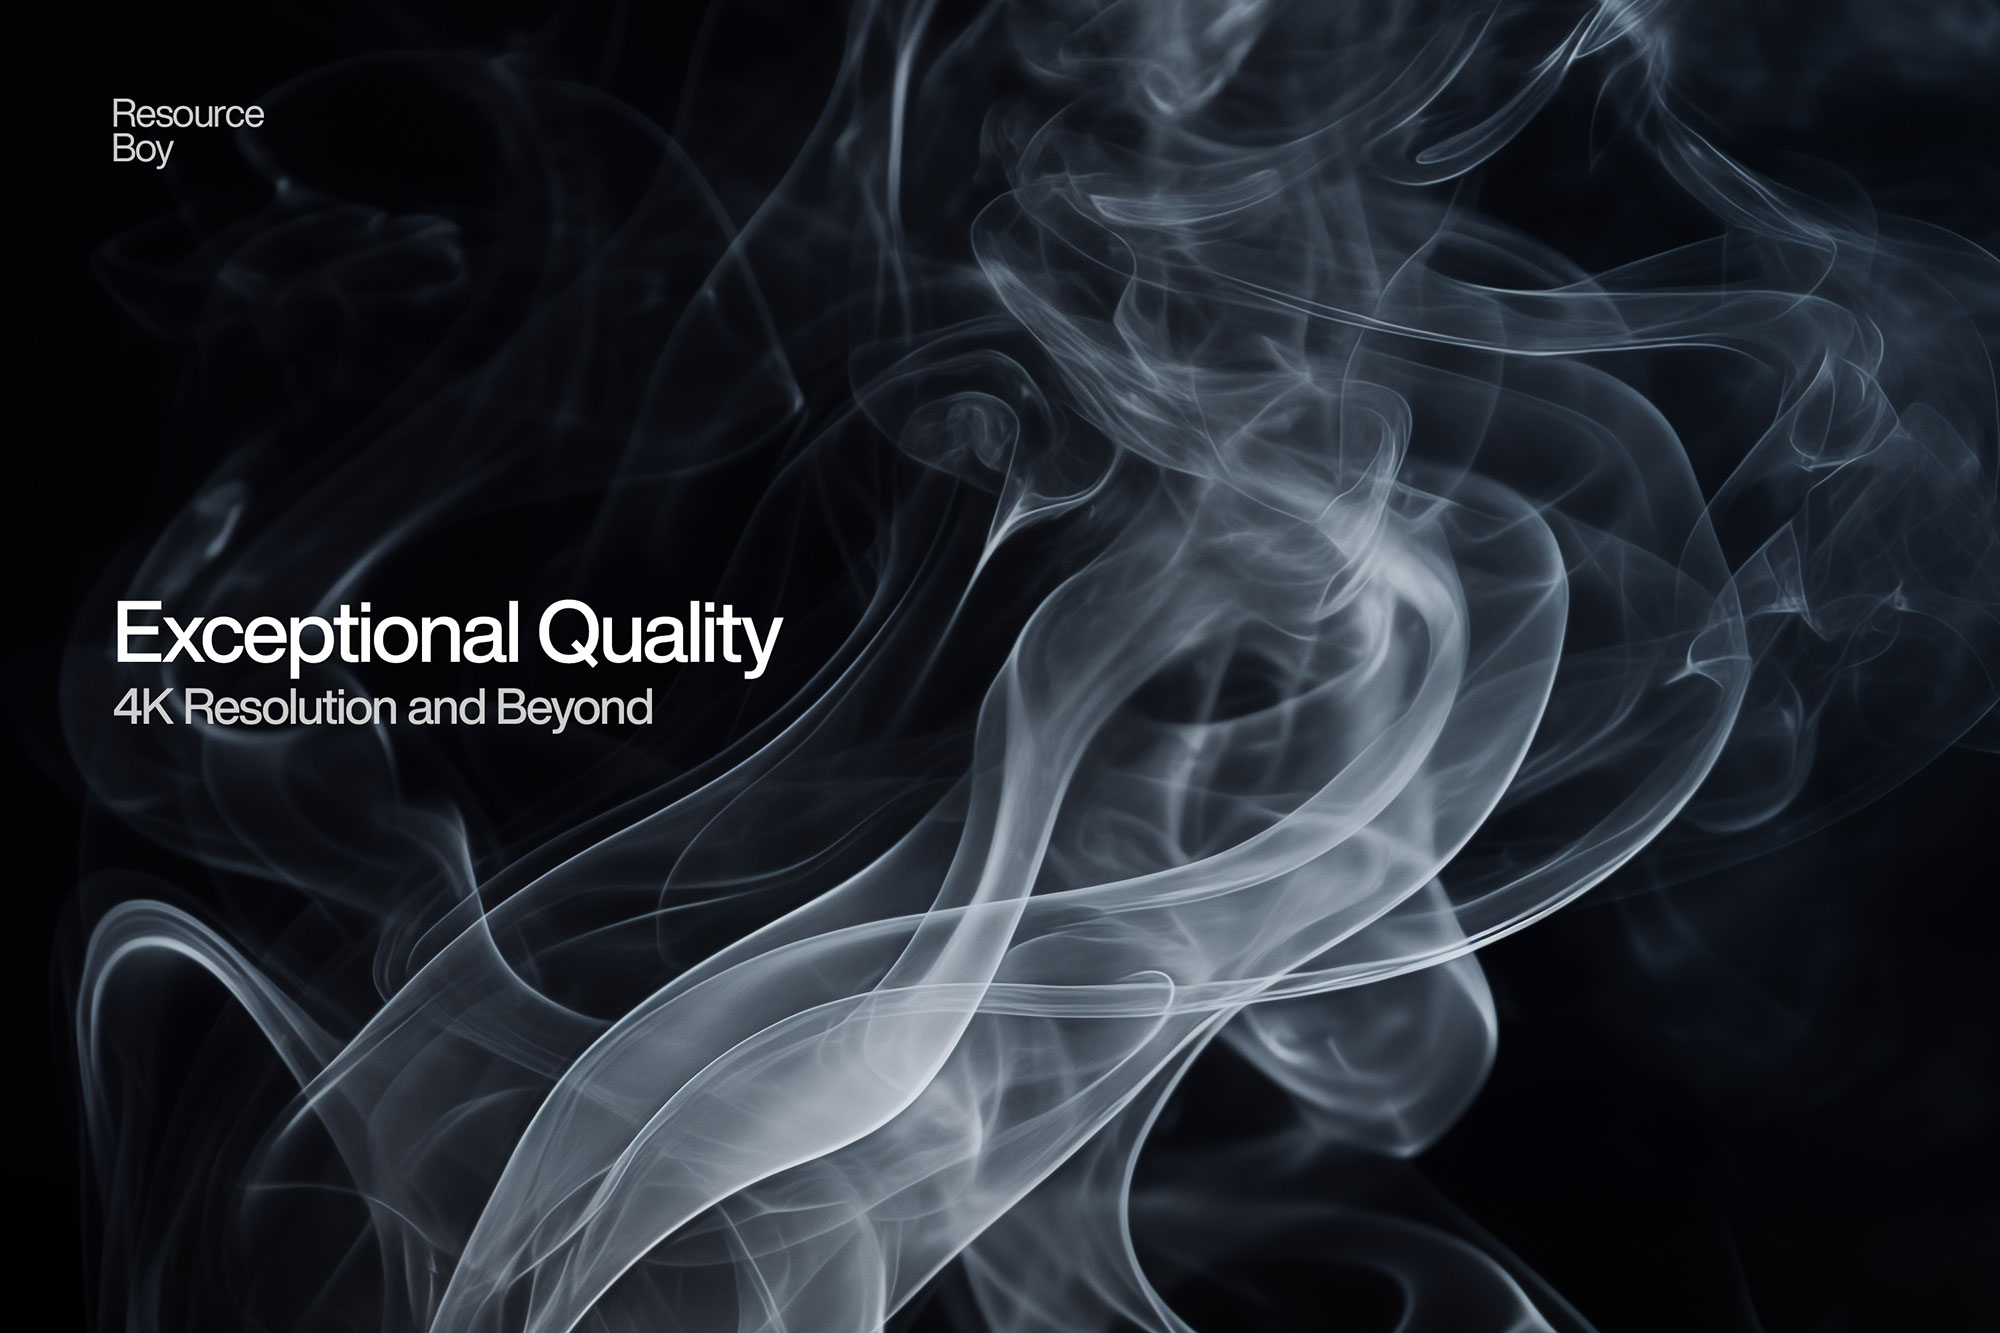 200 Free Smoke Textures / Backgrounds [4k resolution]